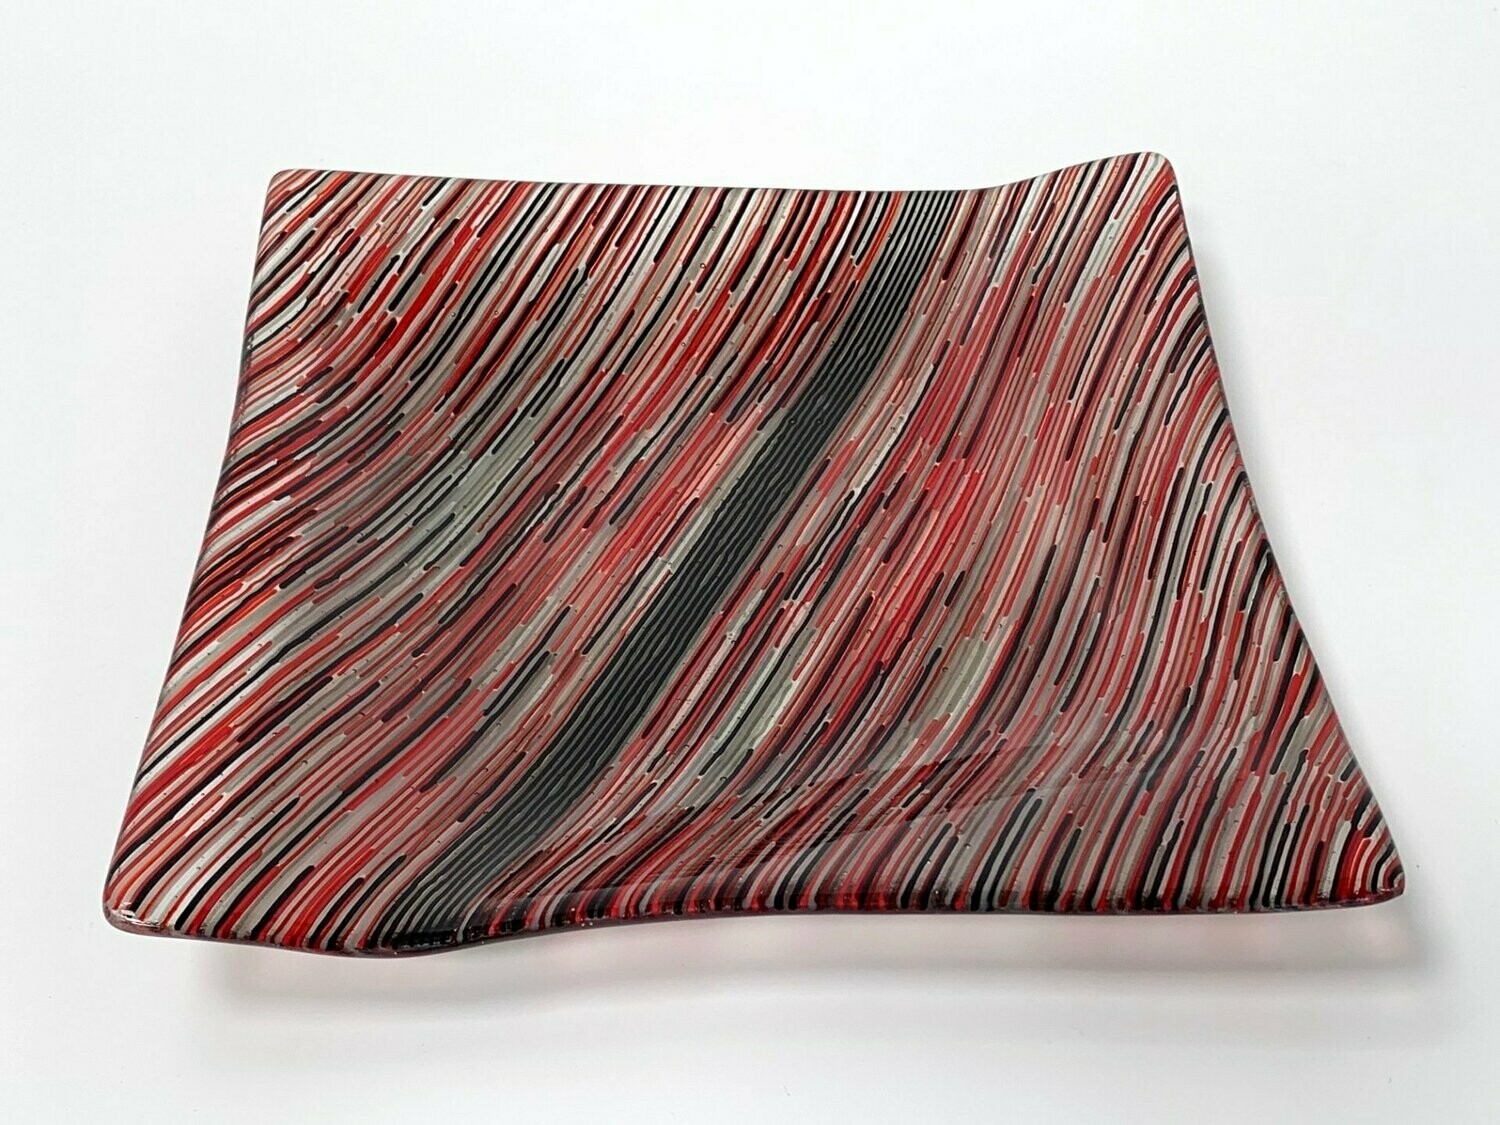 Interference- Fused Glass - Large Angled Square - Black, Grey and Red